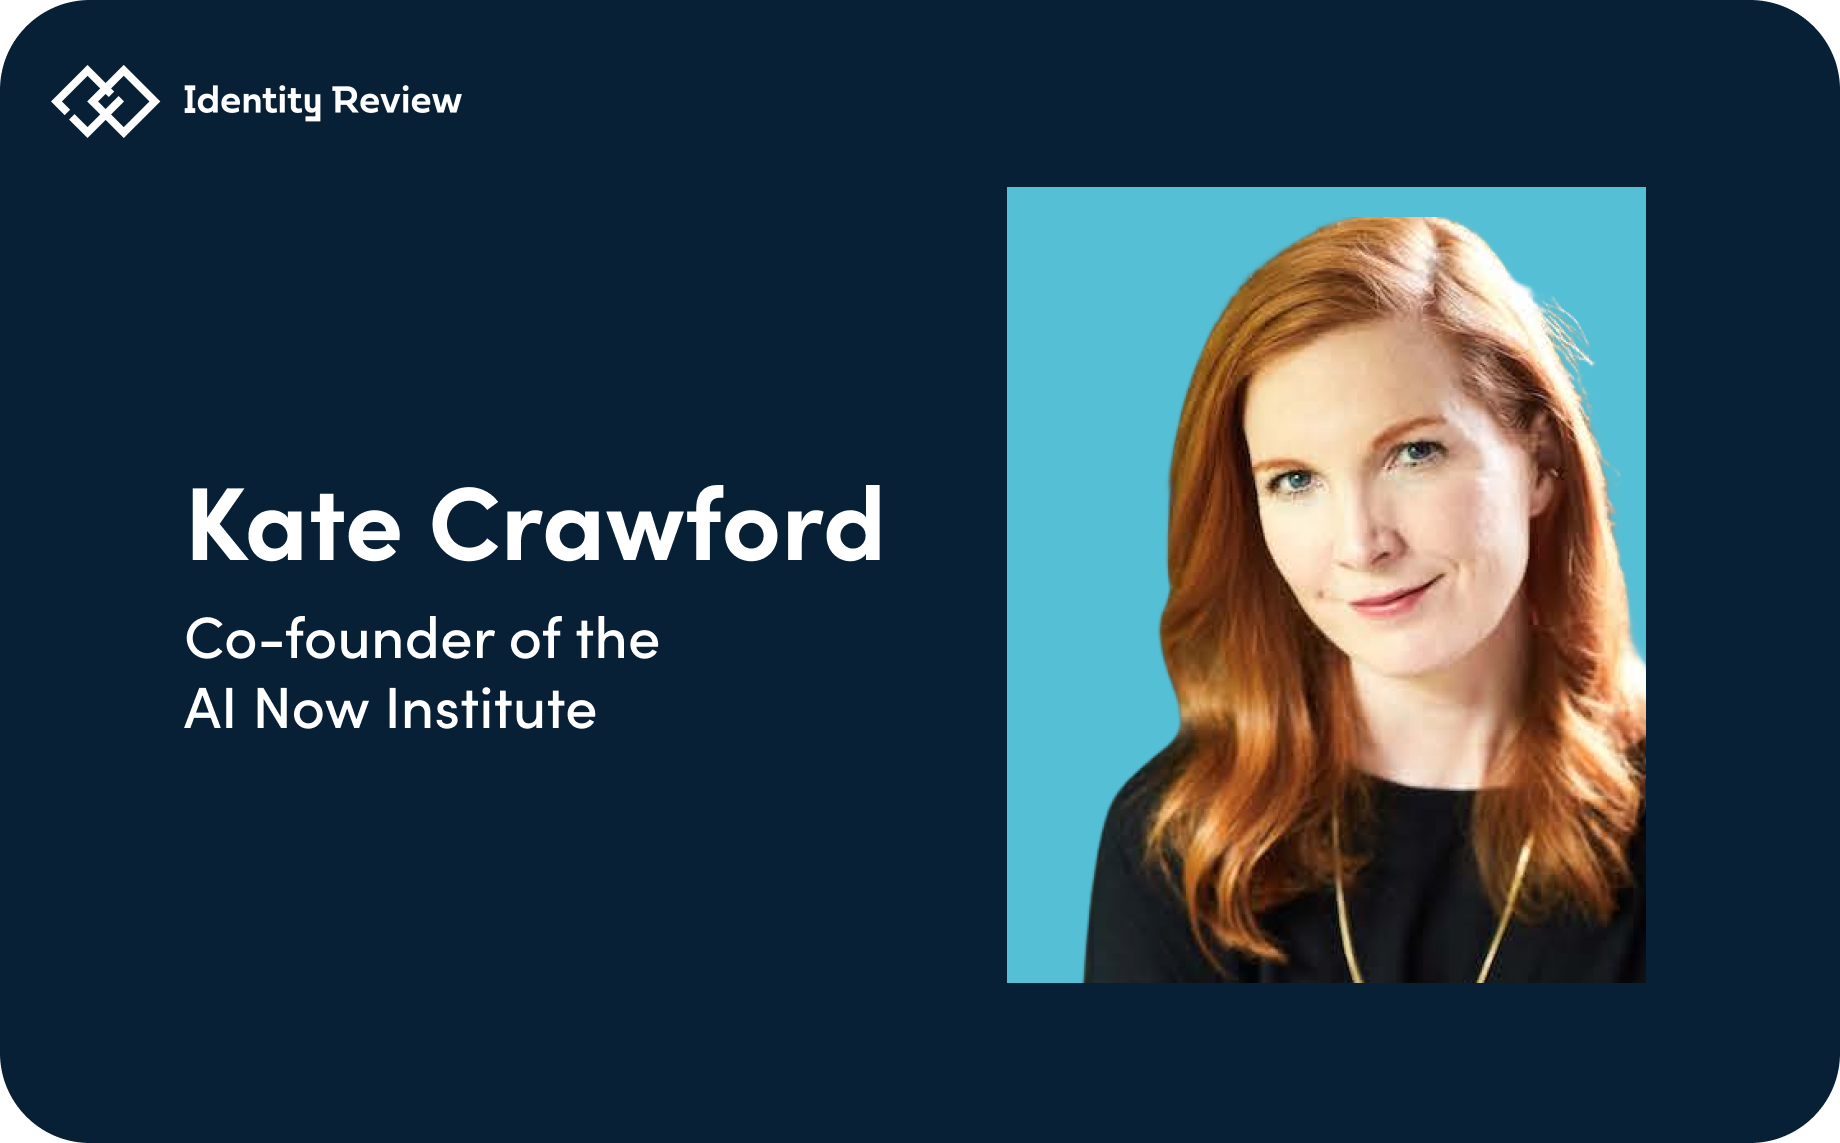 4. Kate Crawford, co-founder of the AI Now Institute